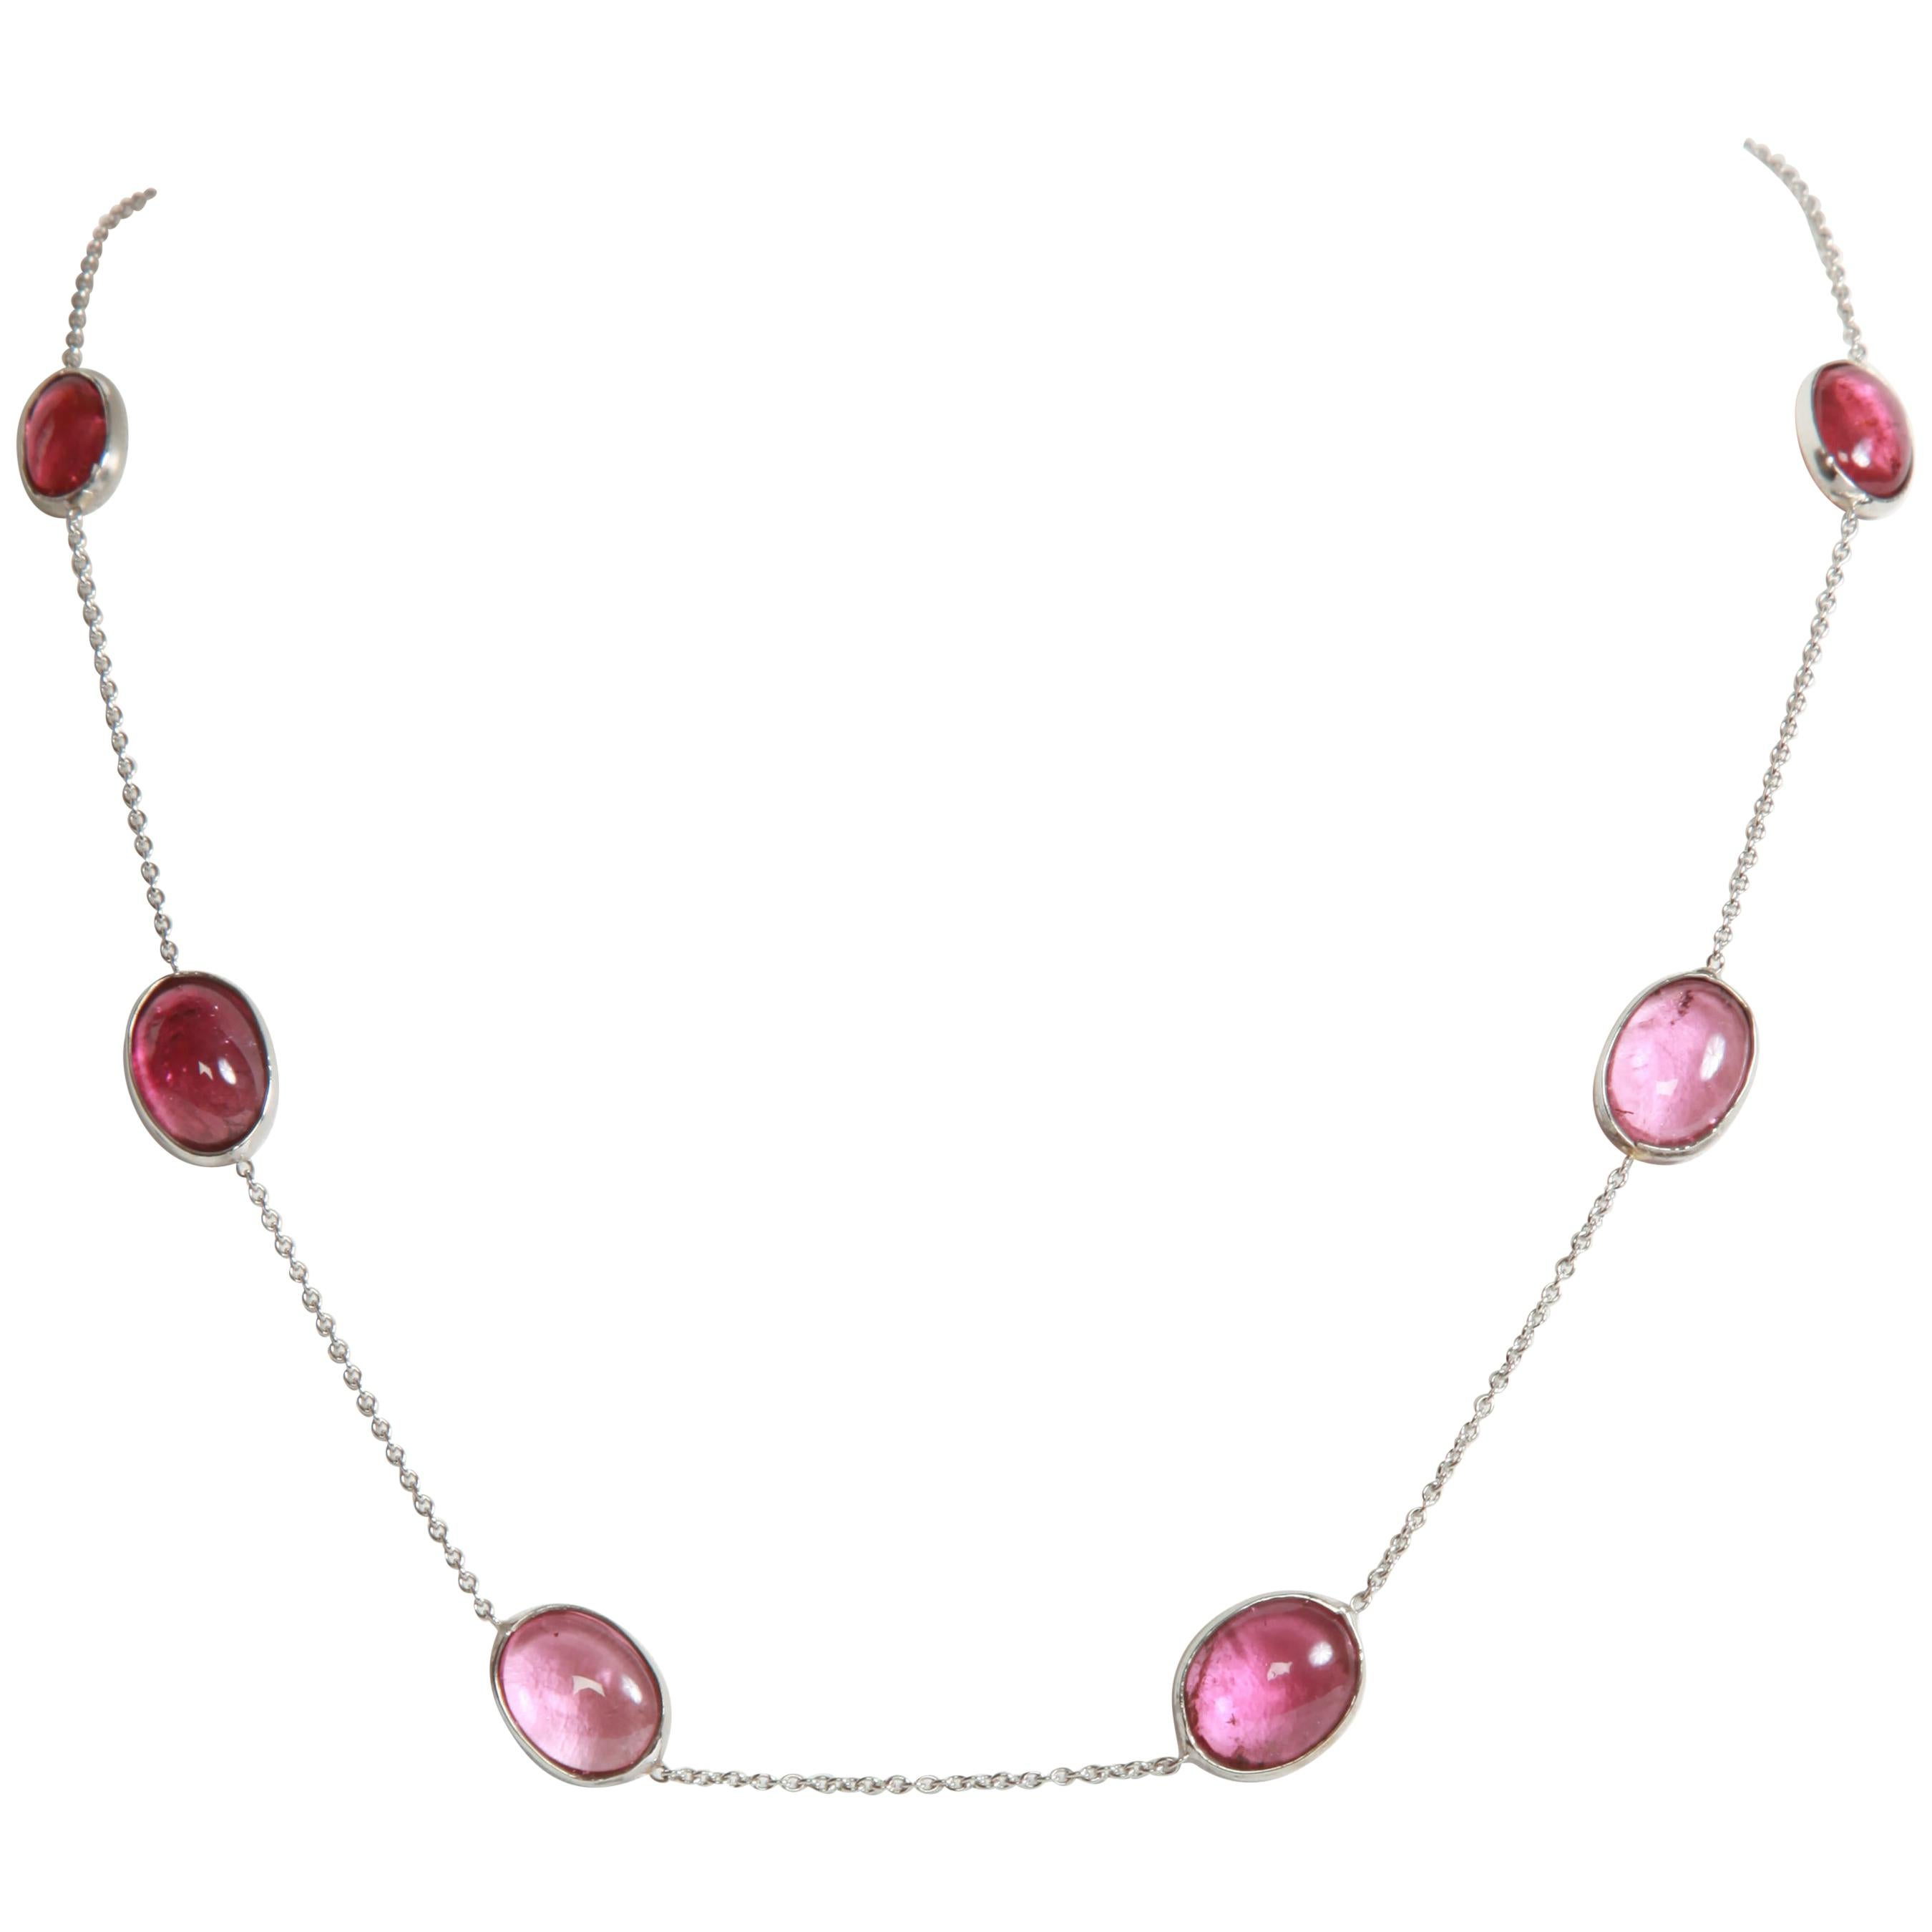 White Gold Chain Necklace Set with Pink Tourmaline Created by Marion Jeantet